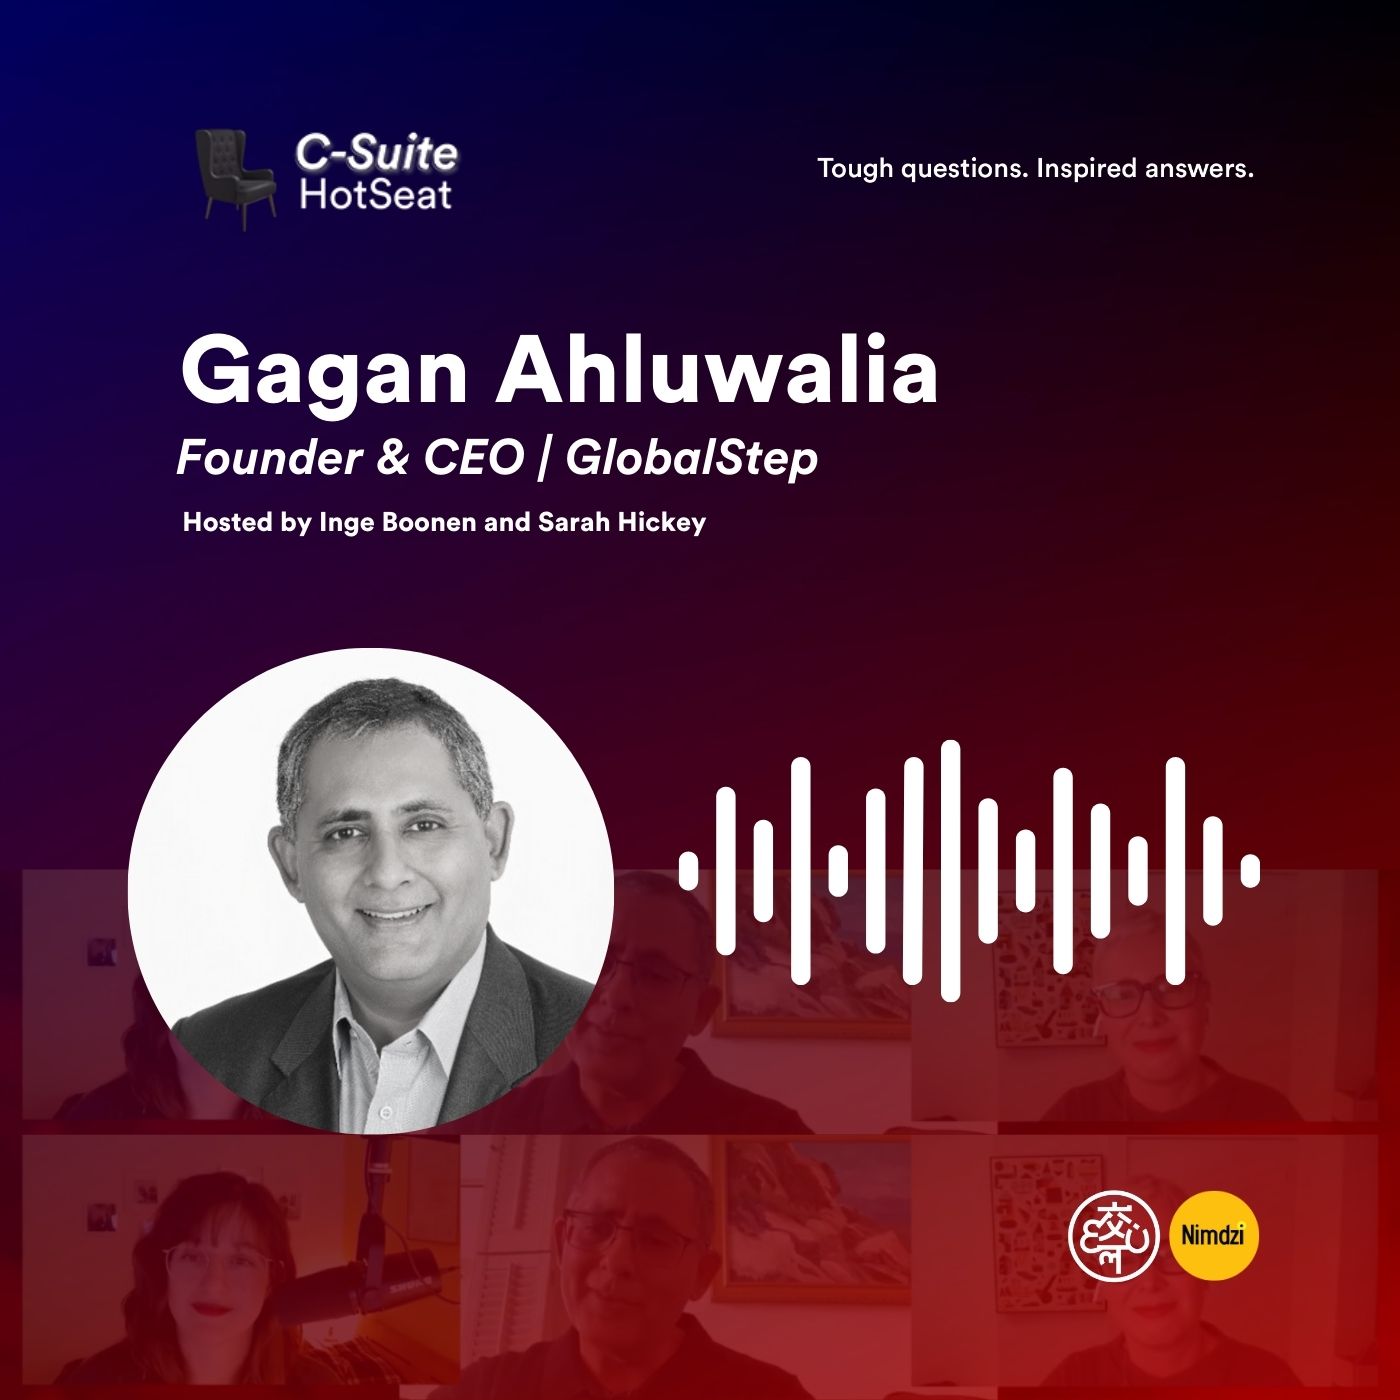 The Key to Success is Introspection with CEO Gagan Ahluwalia | C-Suite HotSeat E26